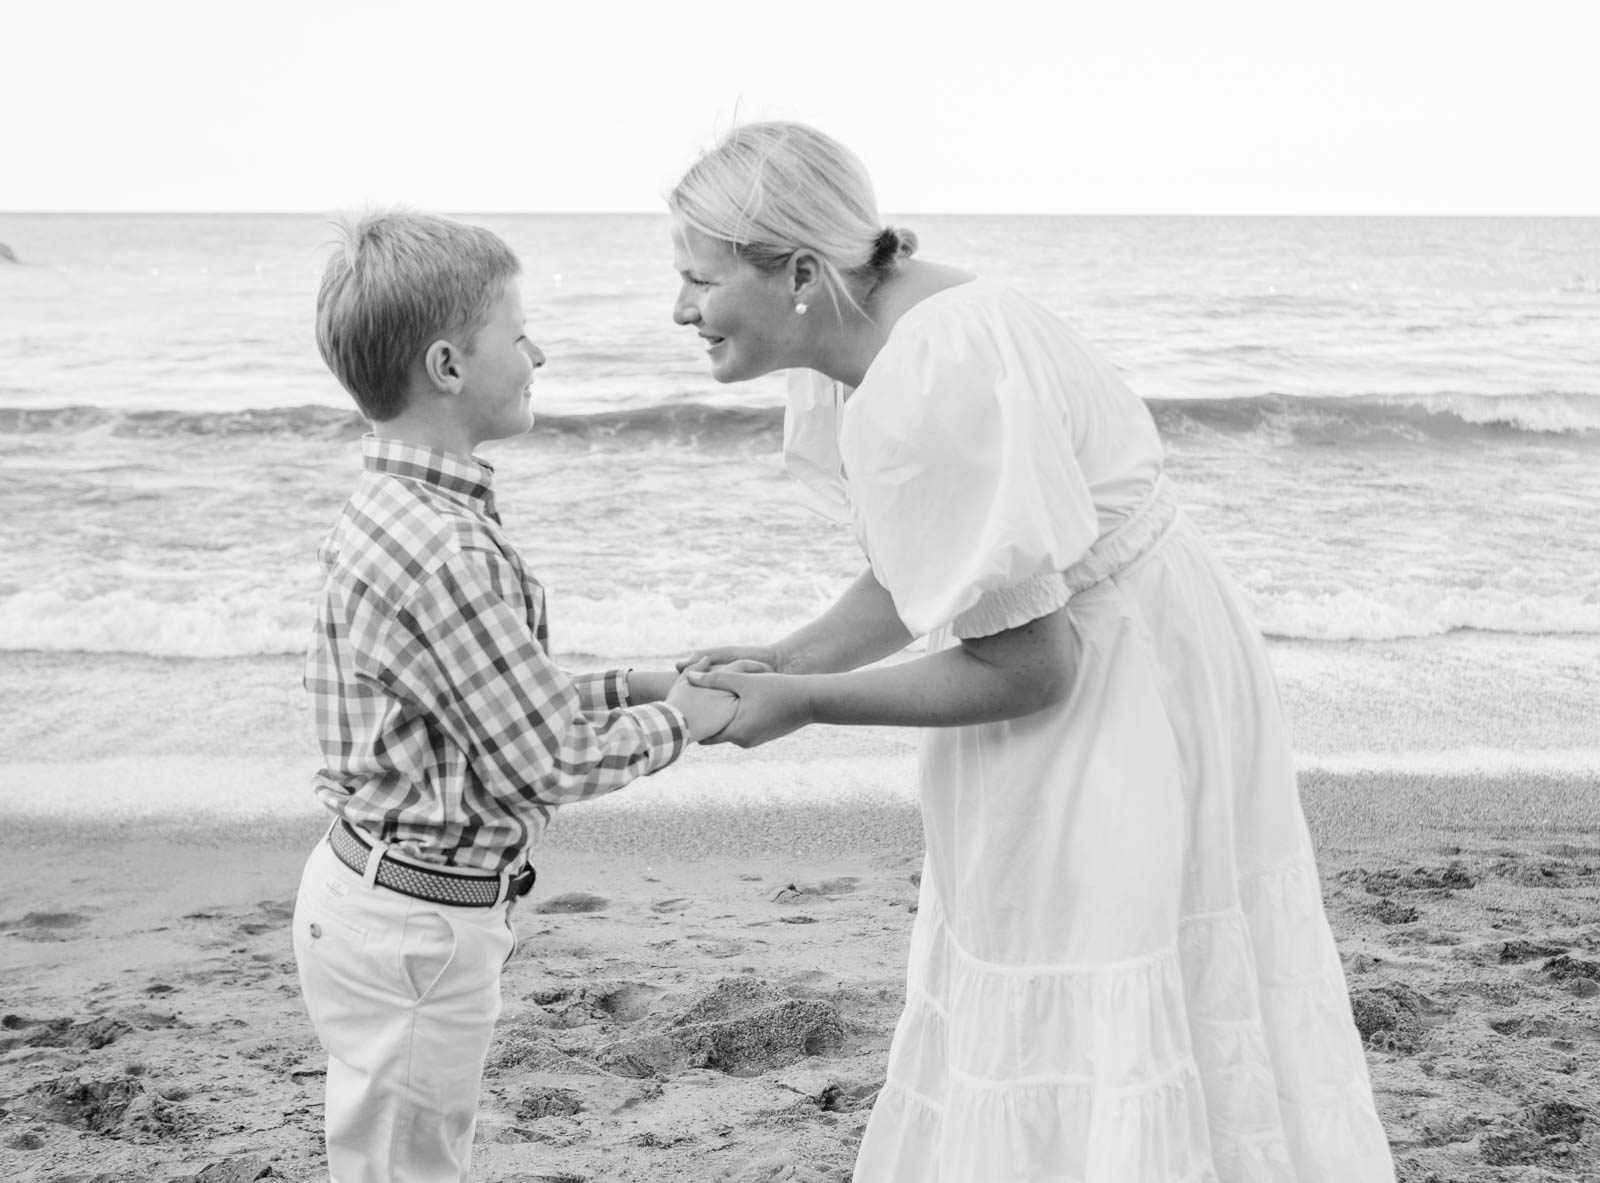 A wilmette photographer captures an image of a mom and son holding hands on the beach looking at each other.